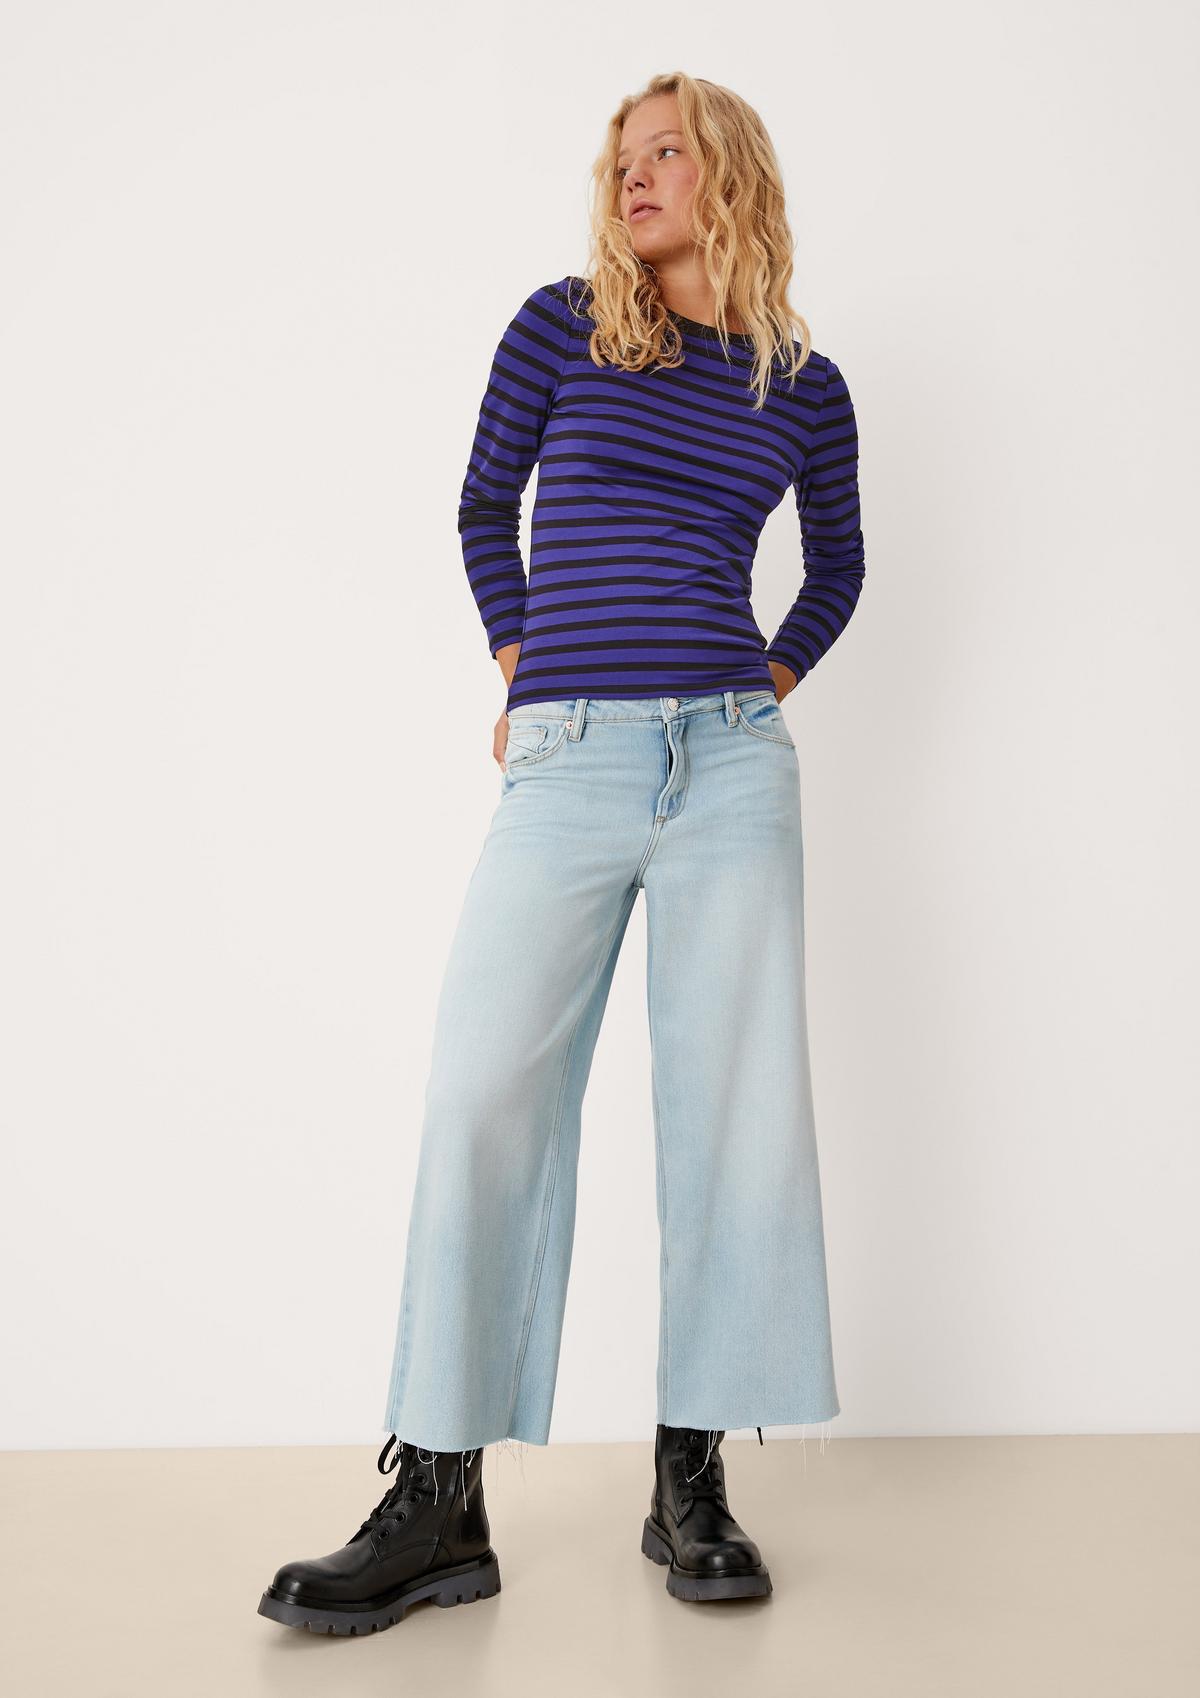 s.Oliver Striped top in rib knit fabric